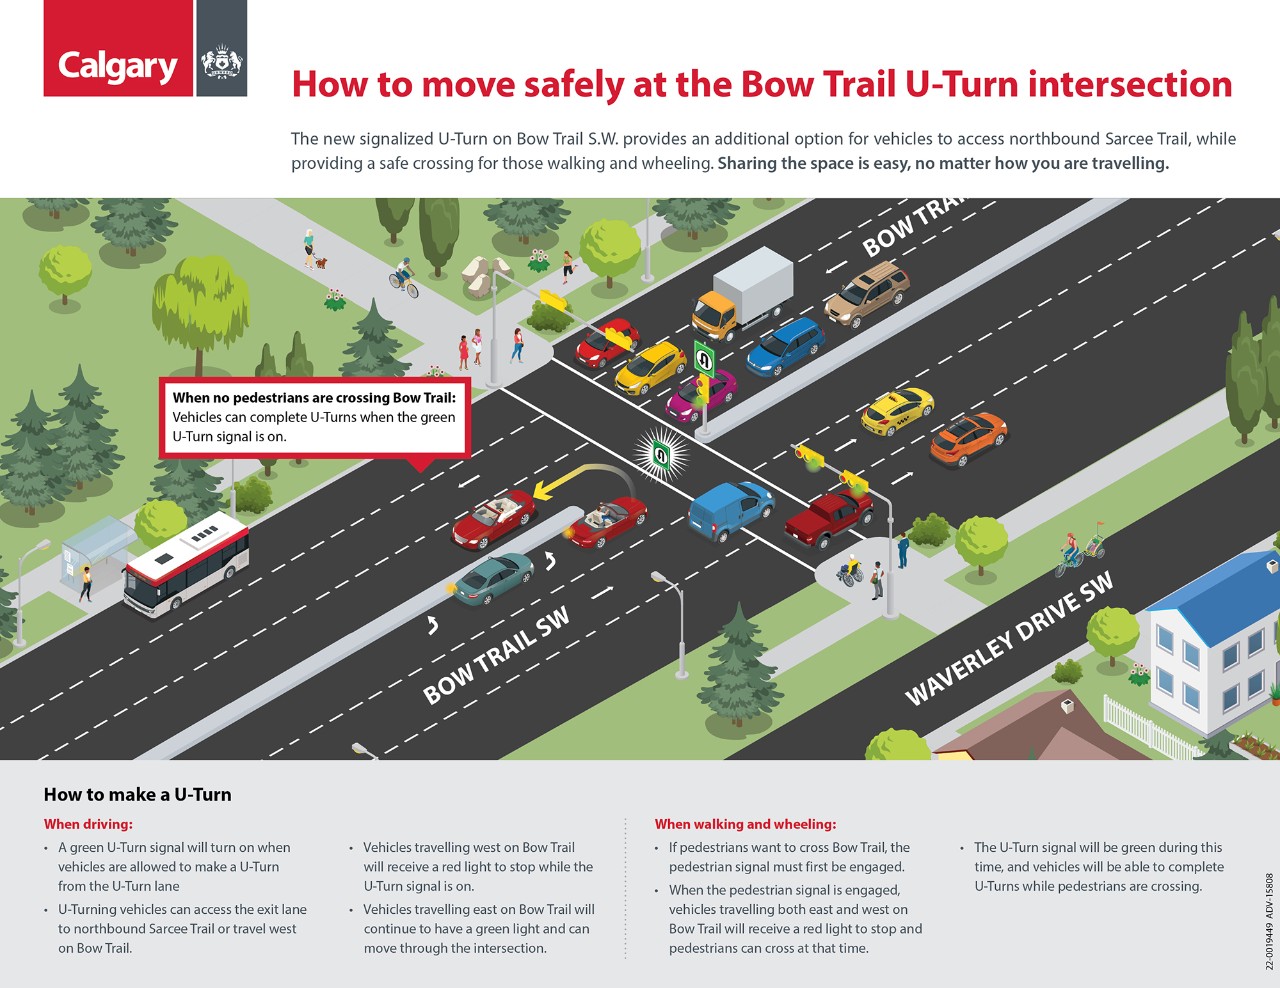 How to make a U-Turn when NO pedestrians are crossing